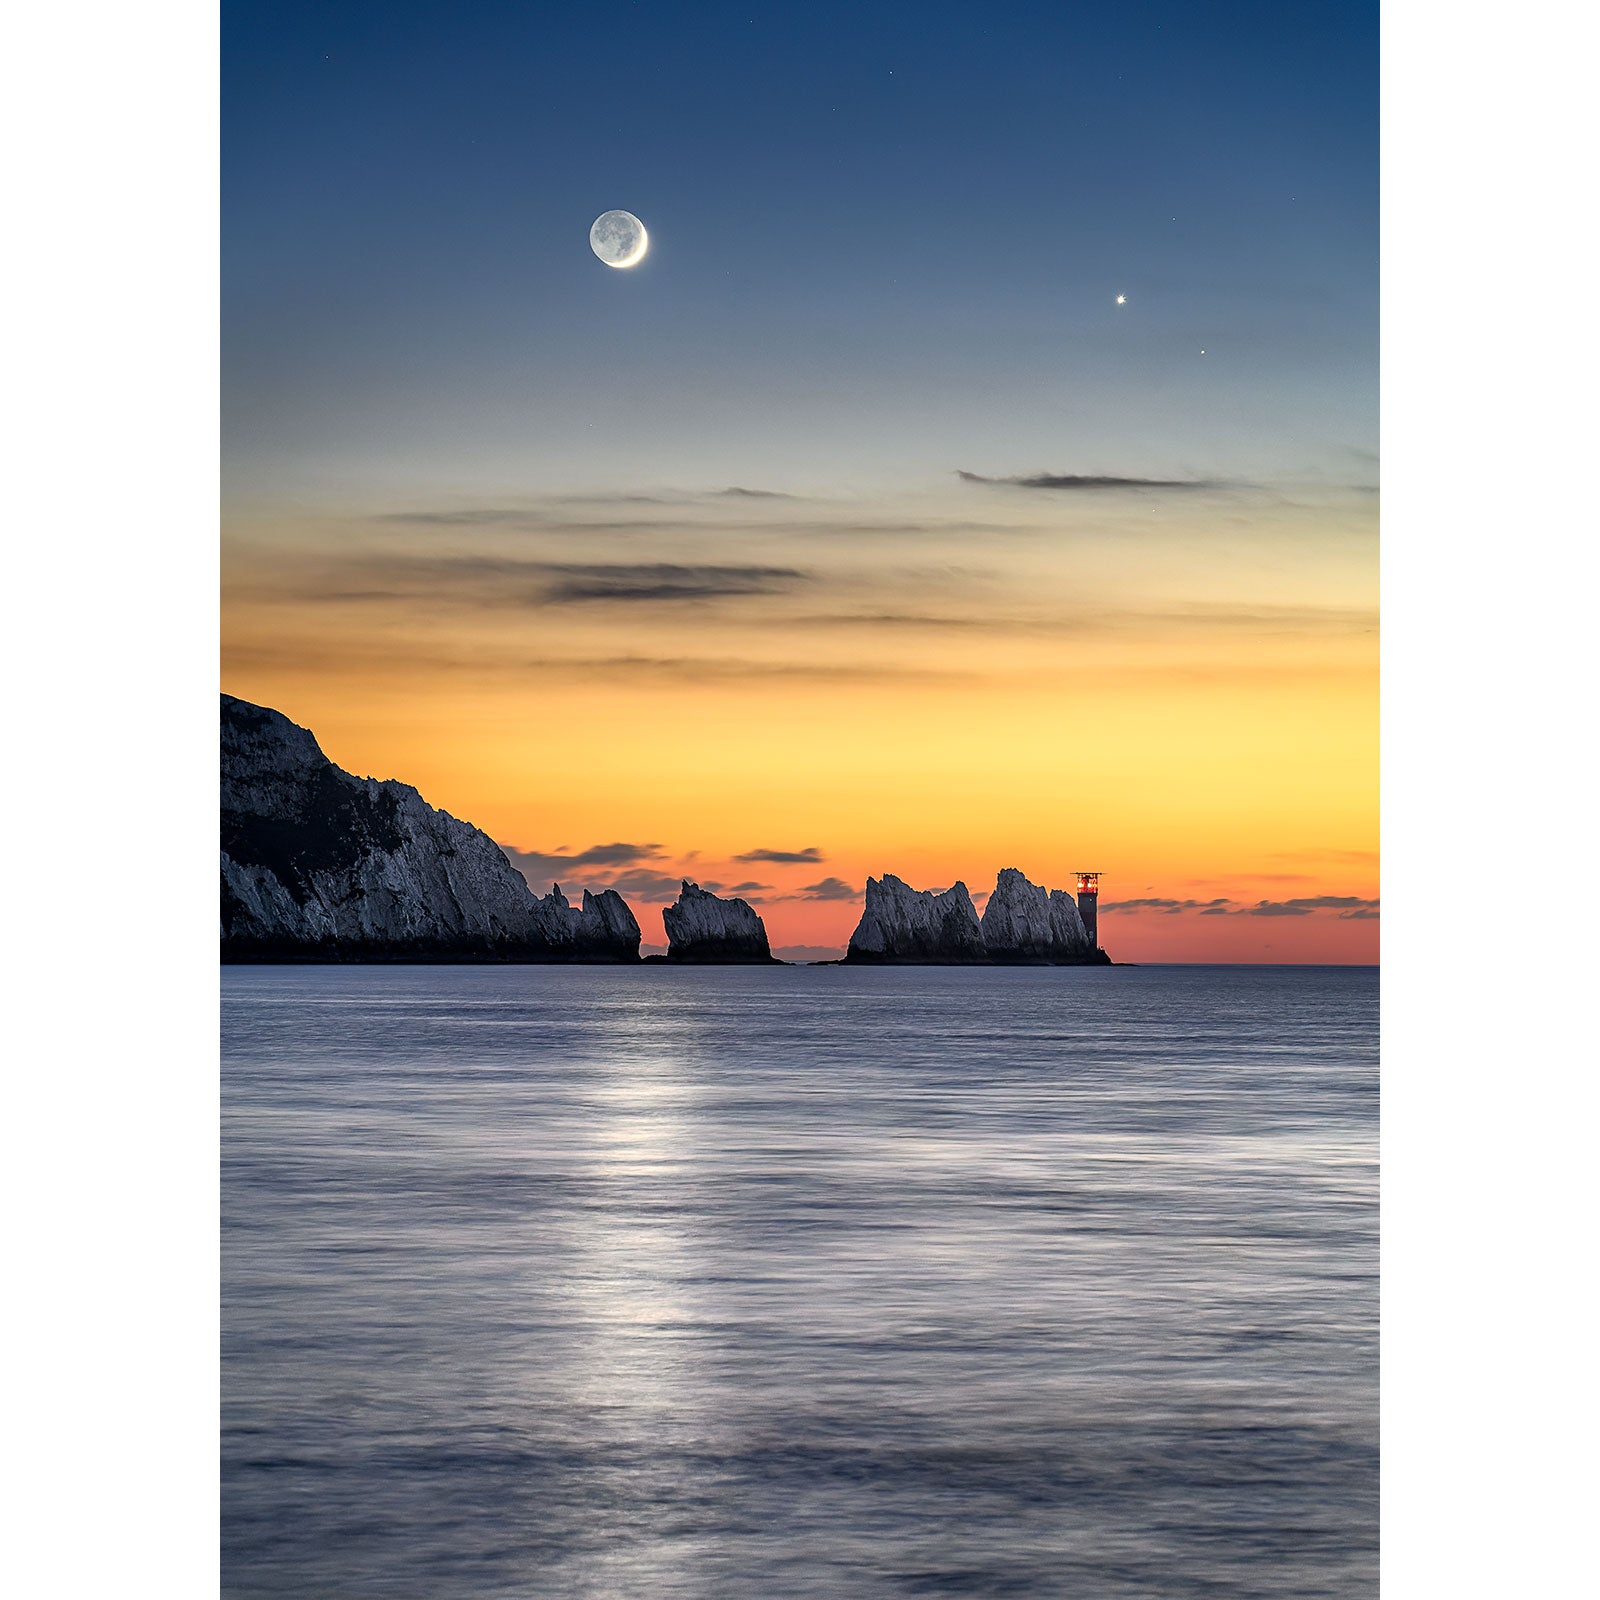 Crescent Moonset over the coastal cliffs at twilight on the Isle of Wight, with a reflection on calm sea waters by Available Light Photography.